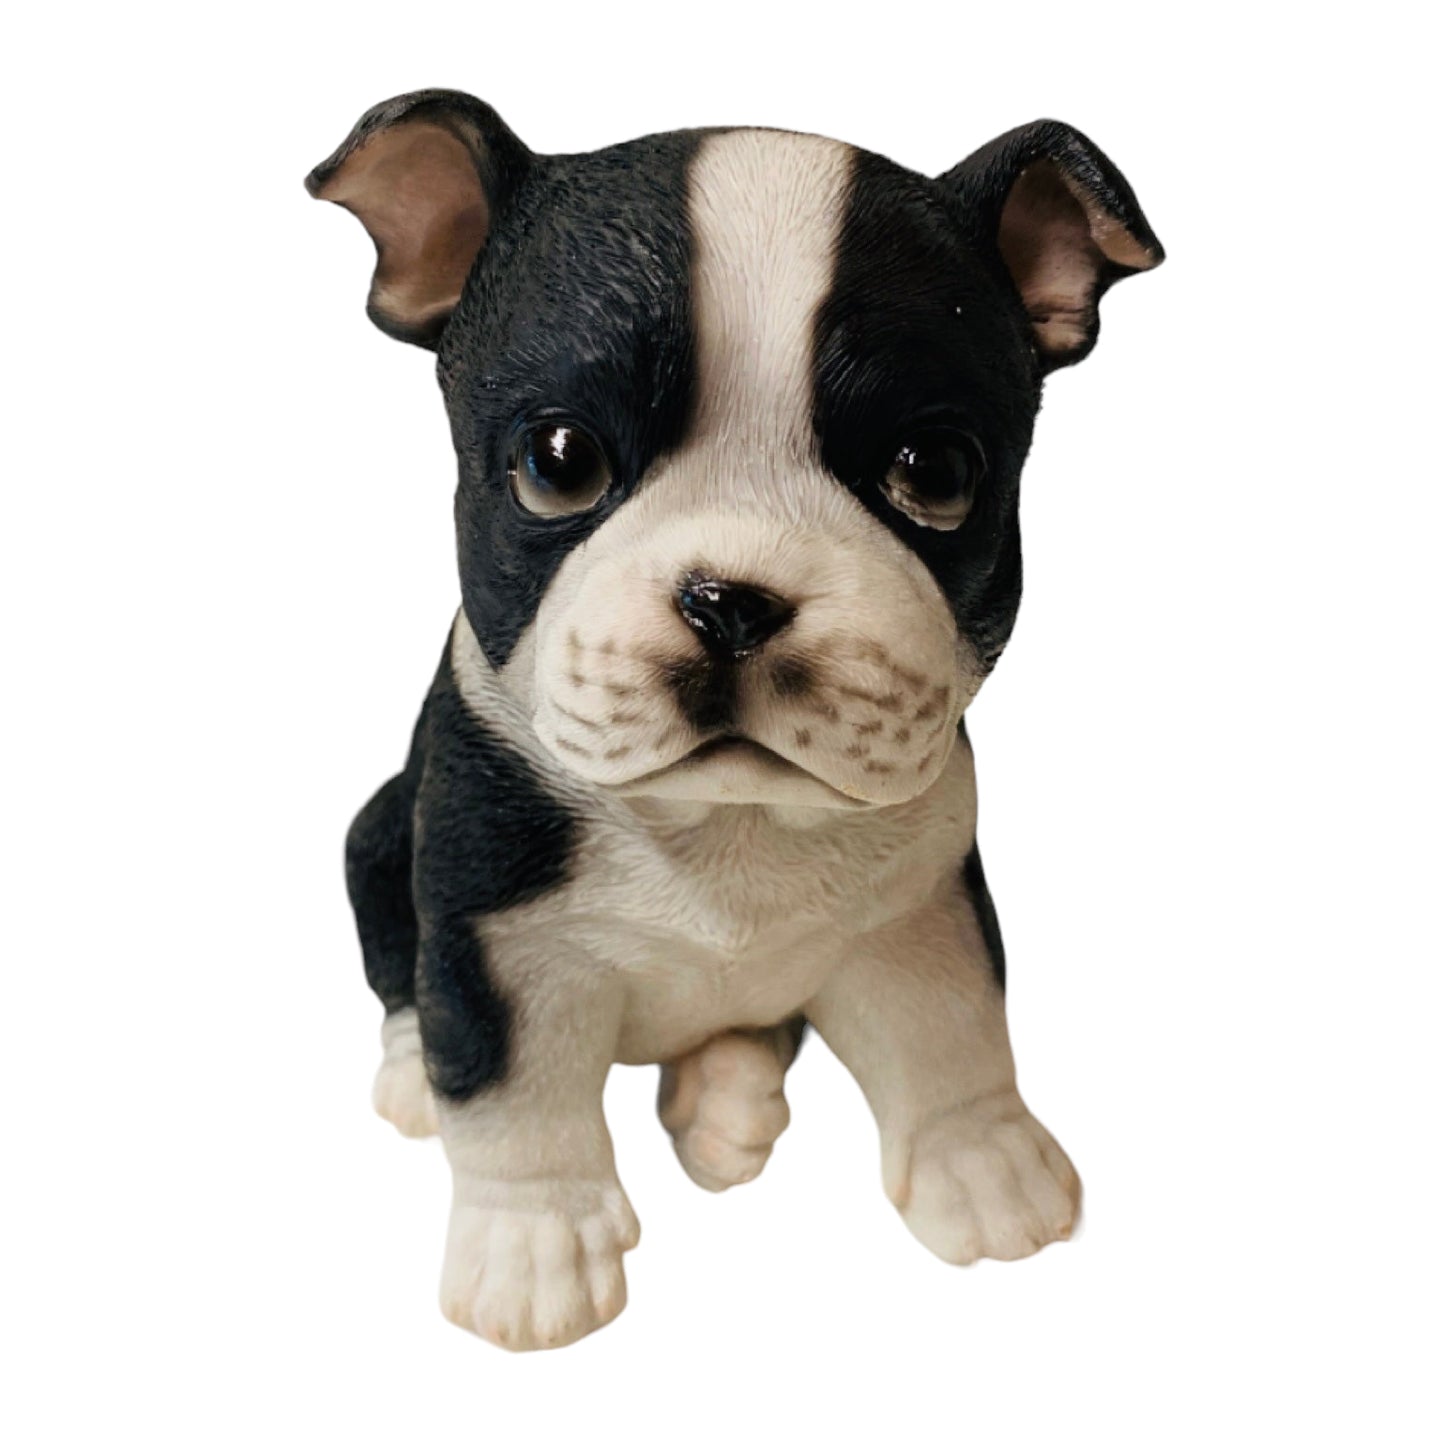 Dog Puppy Frenchie Ornament - The Renmy Store Homewares & Gifts 